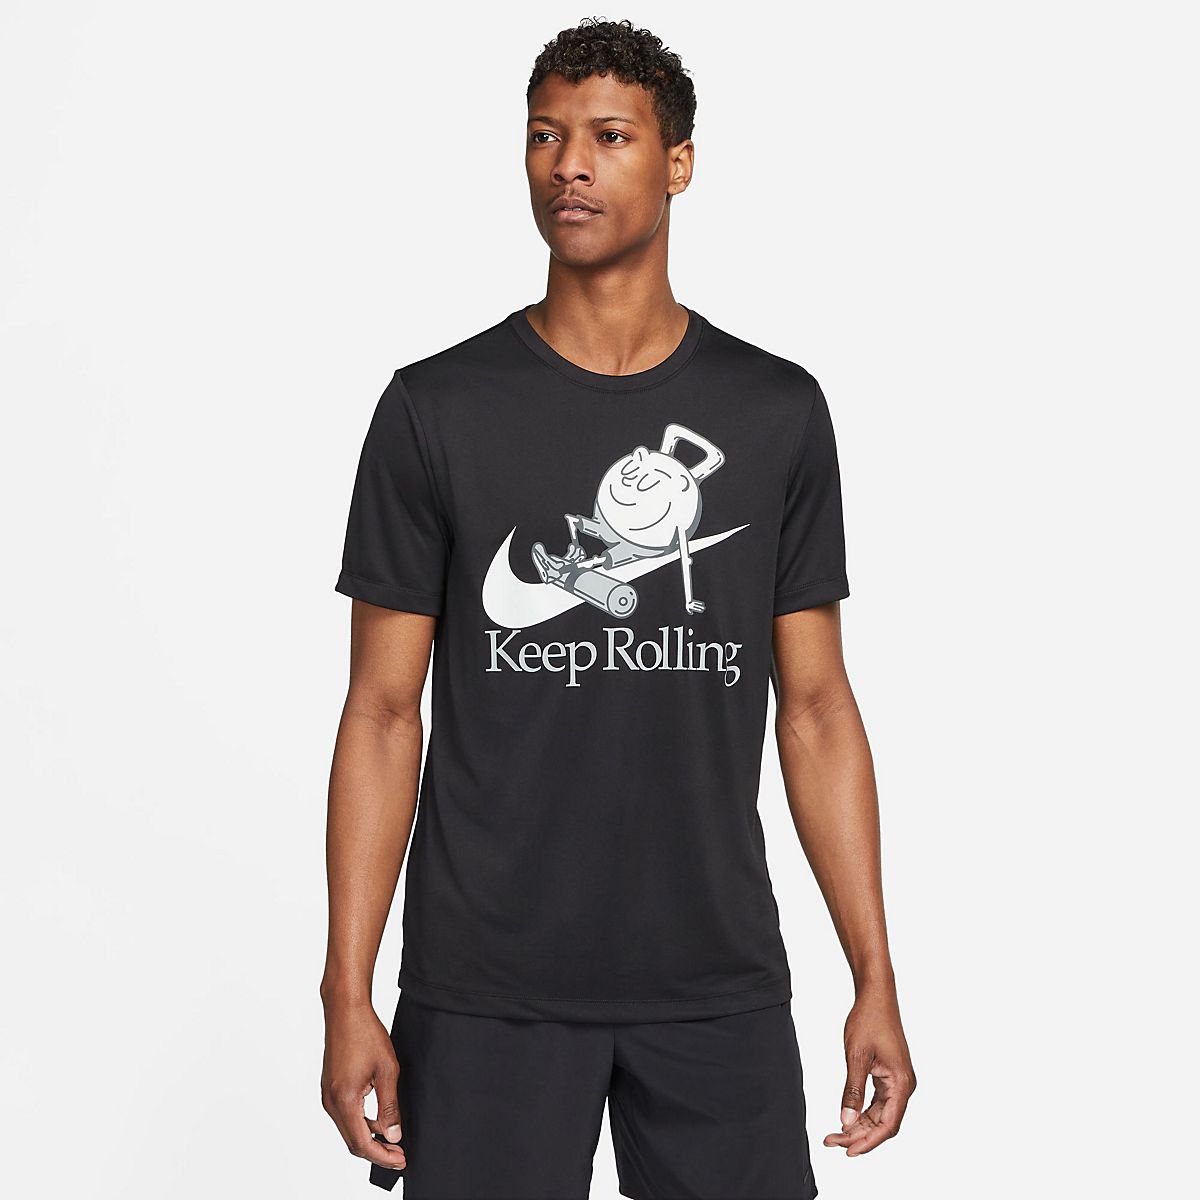 Nike Men's Dri-FIT Fitness T-shirt | Free Shipping at Academy